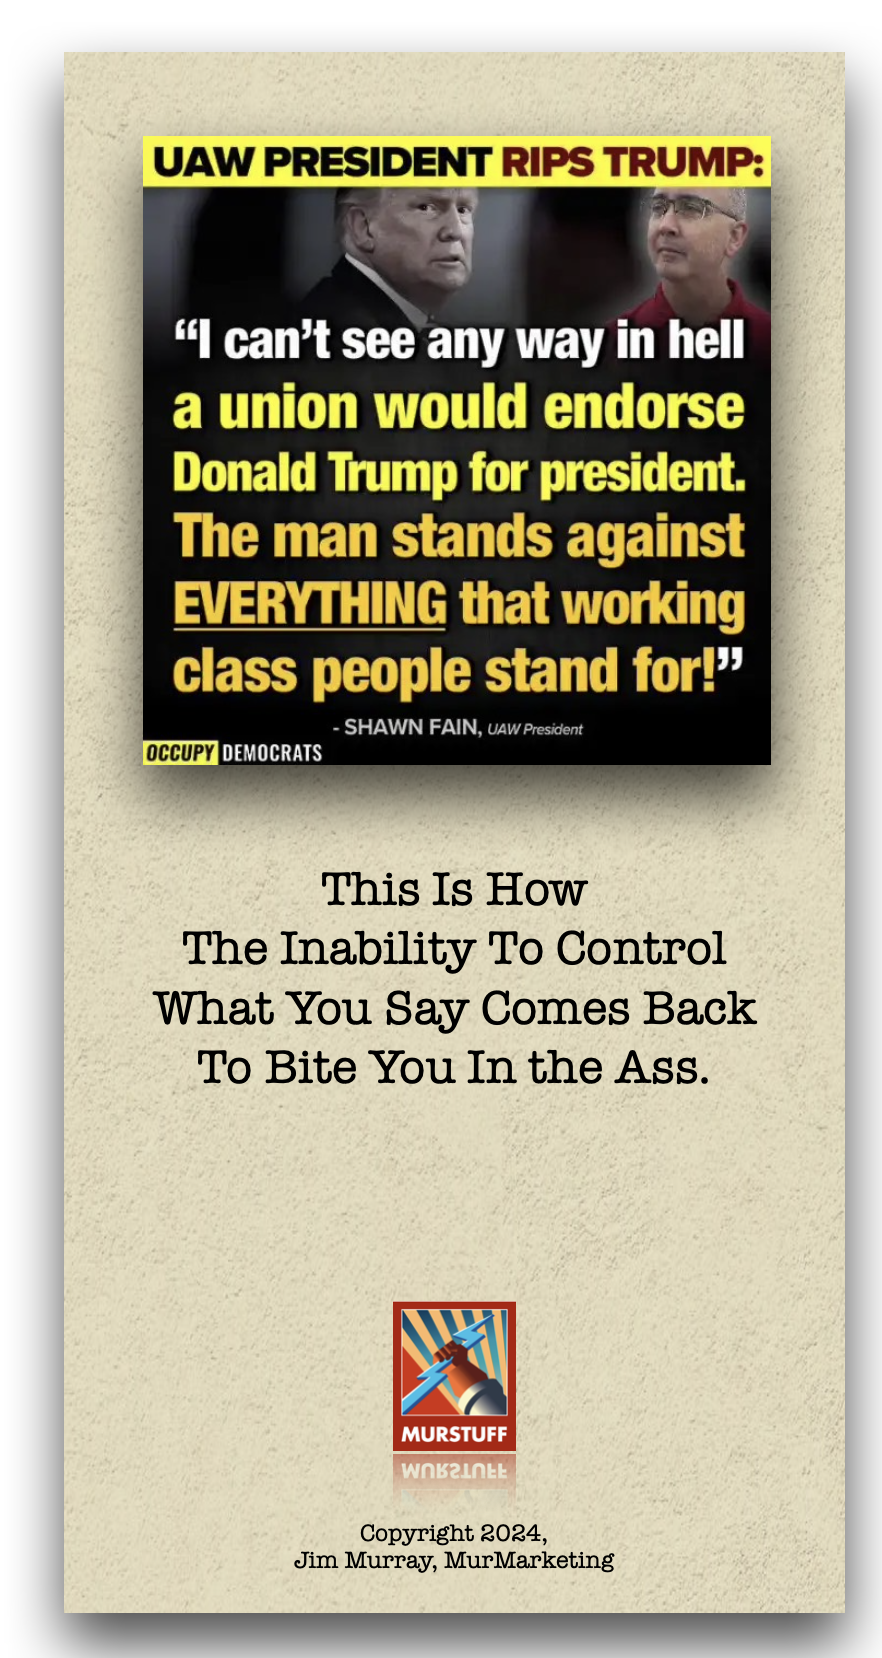 UAW PRESIDENT RIPS TRUMP:

“] can’t see any way in hell
a union would endorse
Donald Trump for president.

The man stands against
[372 a1, [R= RT TY
class people a for?”

- SHAWN FAIN, ¢

 

OCCUPY LITHTAN

This Is How
The Inability To Control
What You Say Comes Back
To Bite You In the Ass.

Copyright 2024,
Jim Murray, MurMarketing